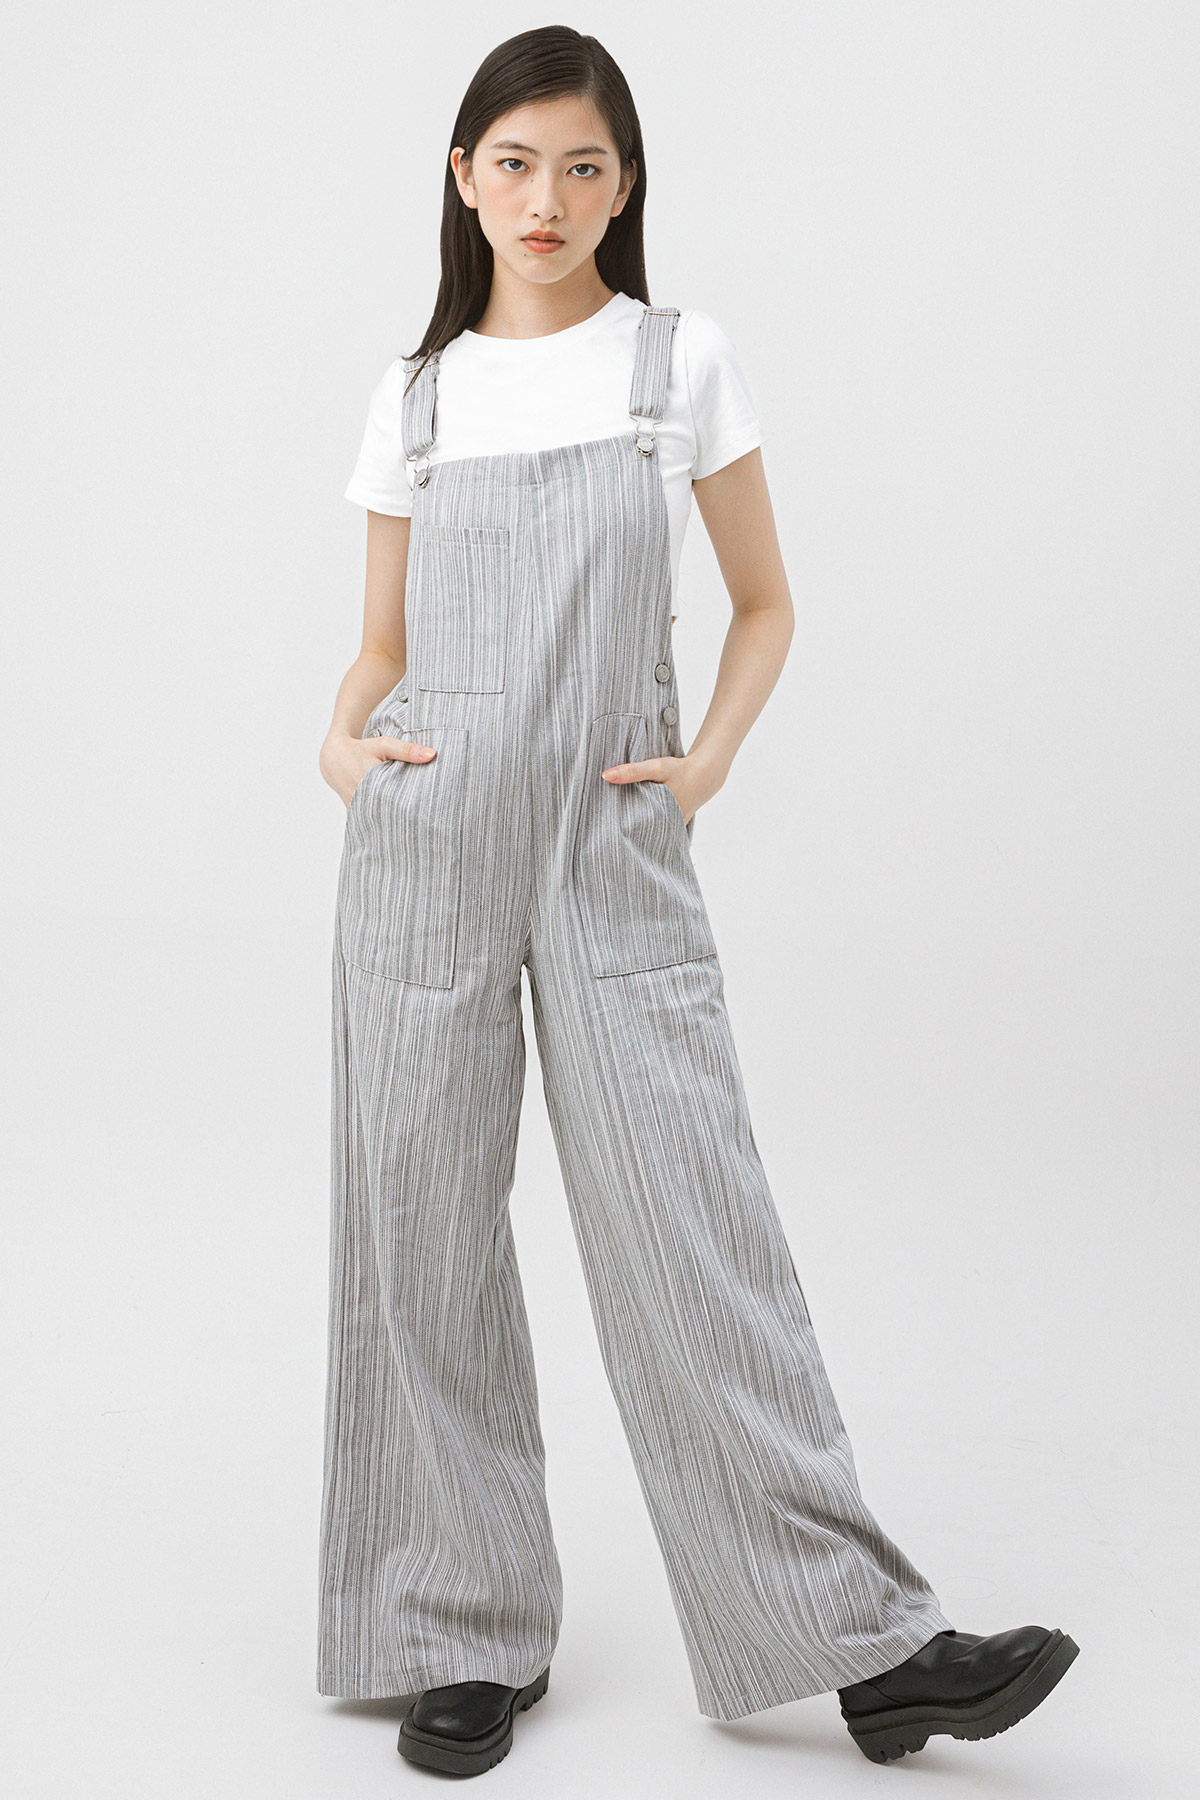 CAPUCINE JUMPSUIT - WHISTLER GREY [BY MODPARADE]